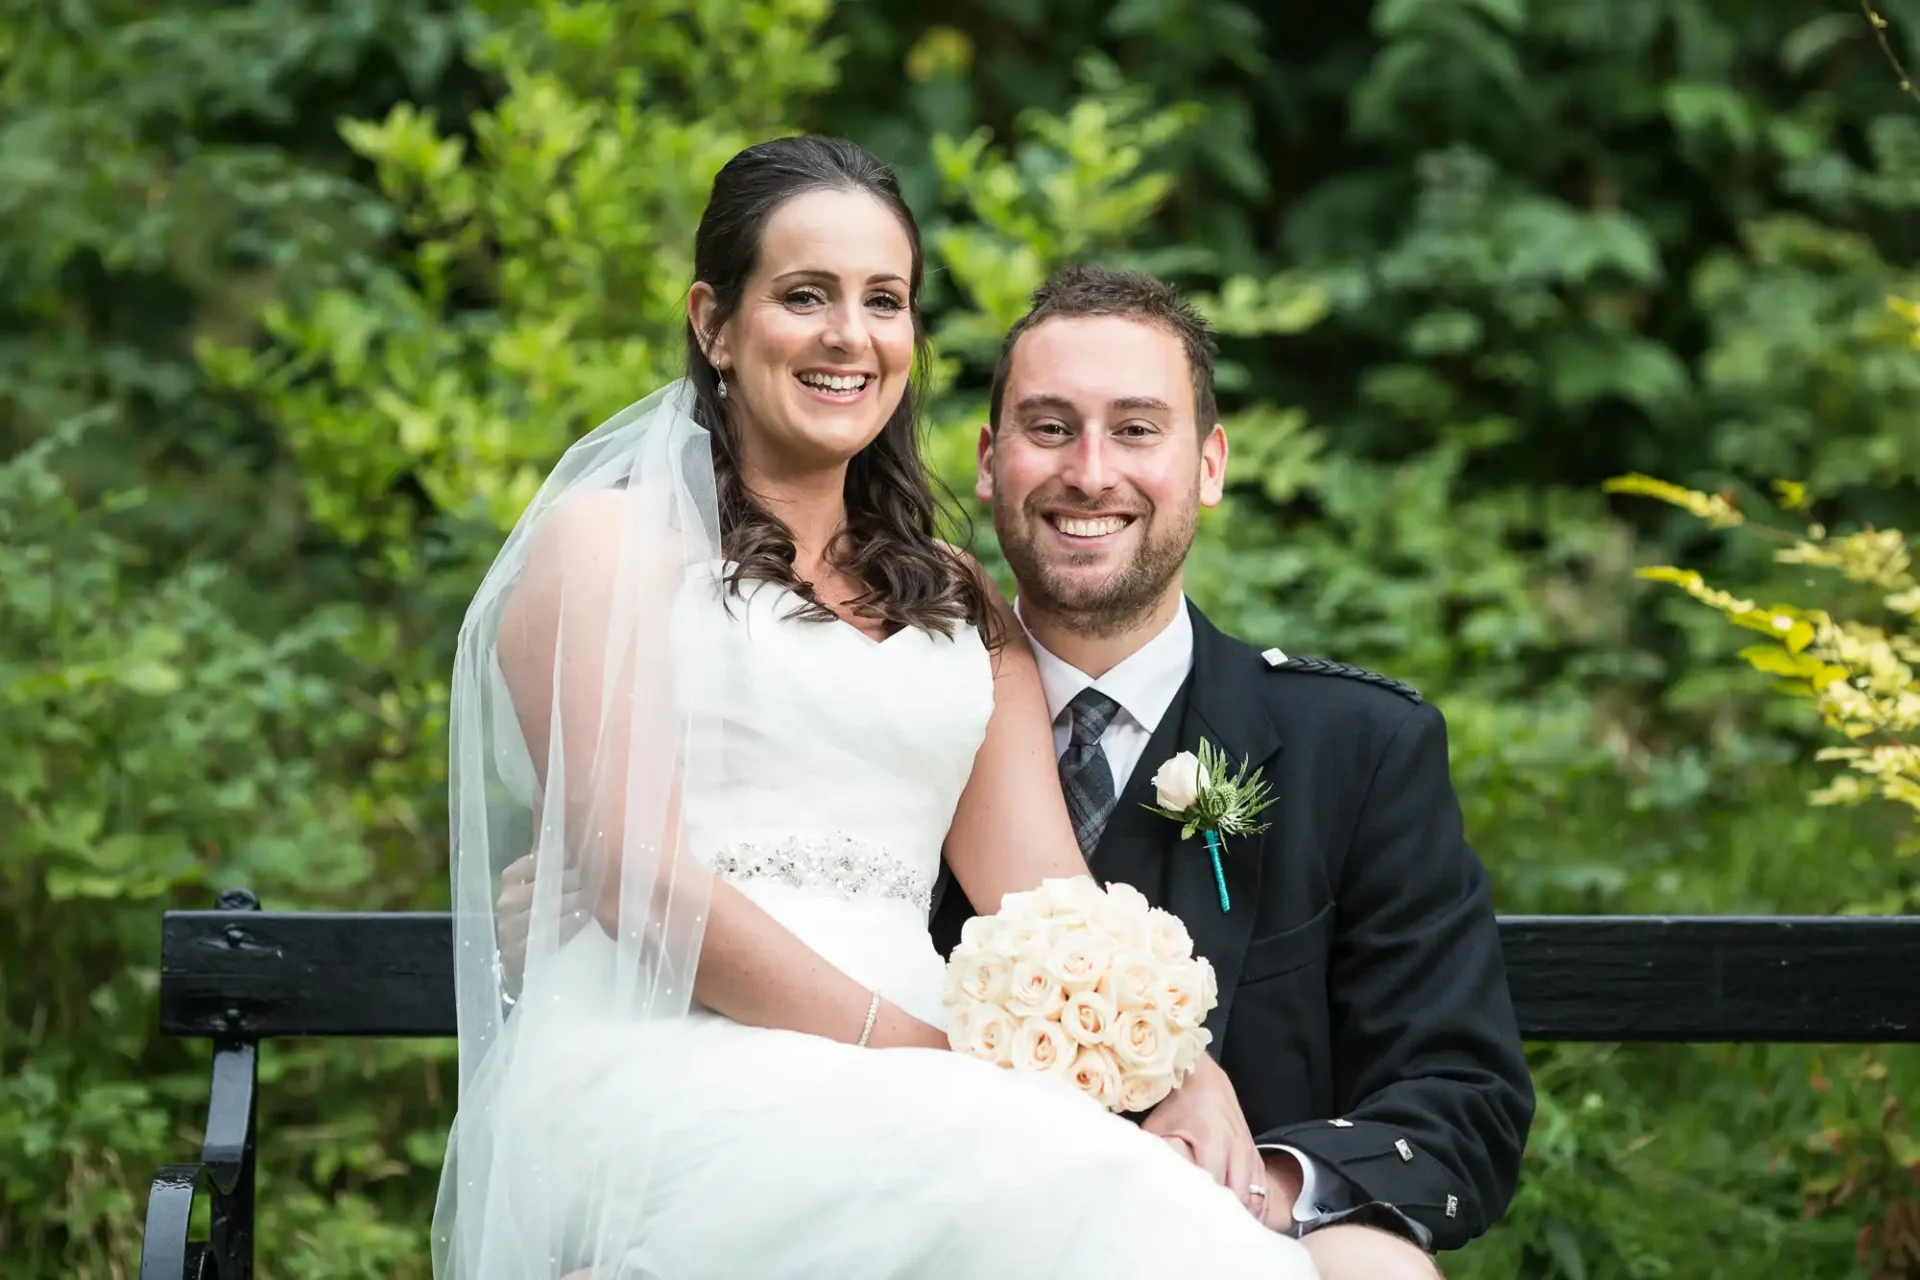 A smiling bride and groom seated on a park bench, the bride holding a bouquet of cream roses.